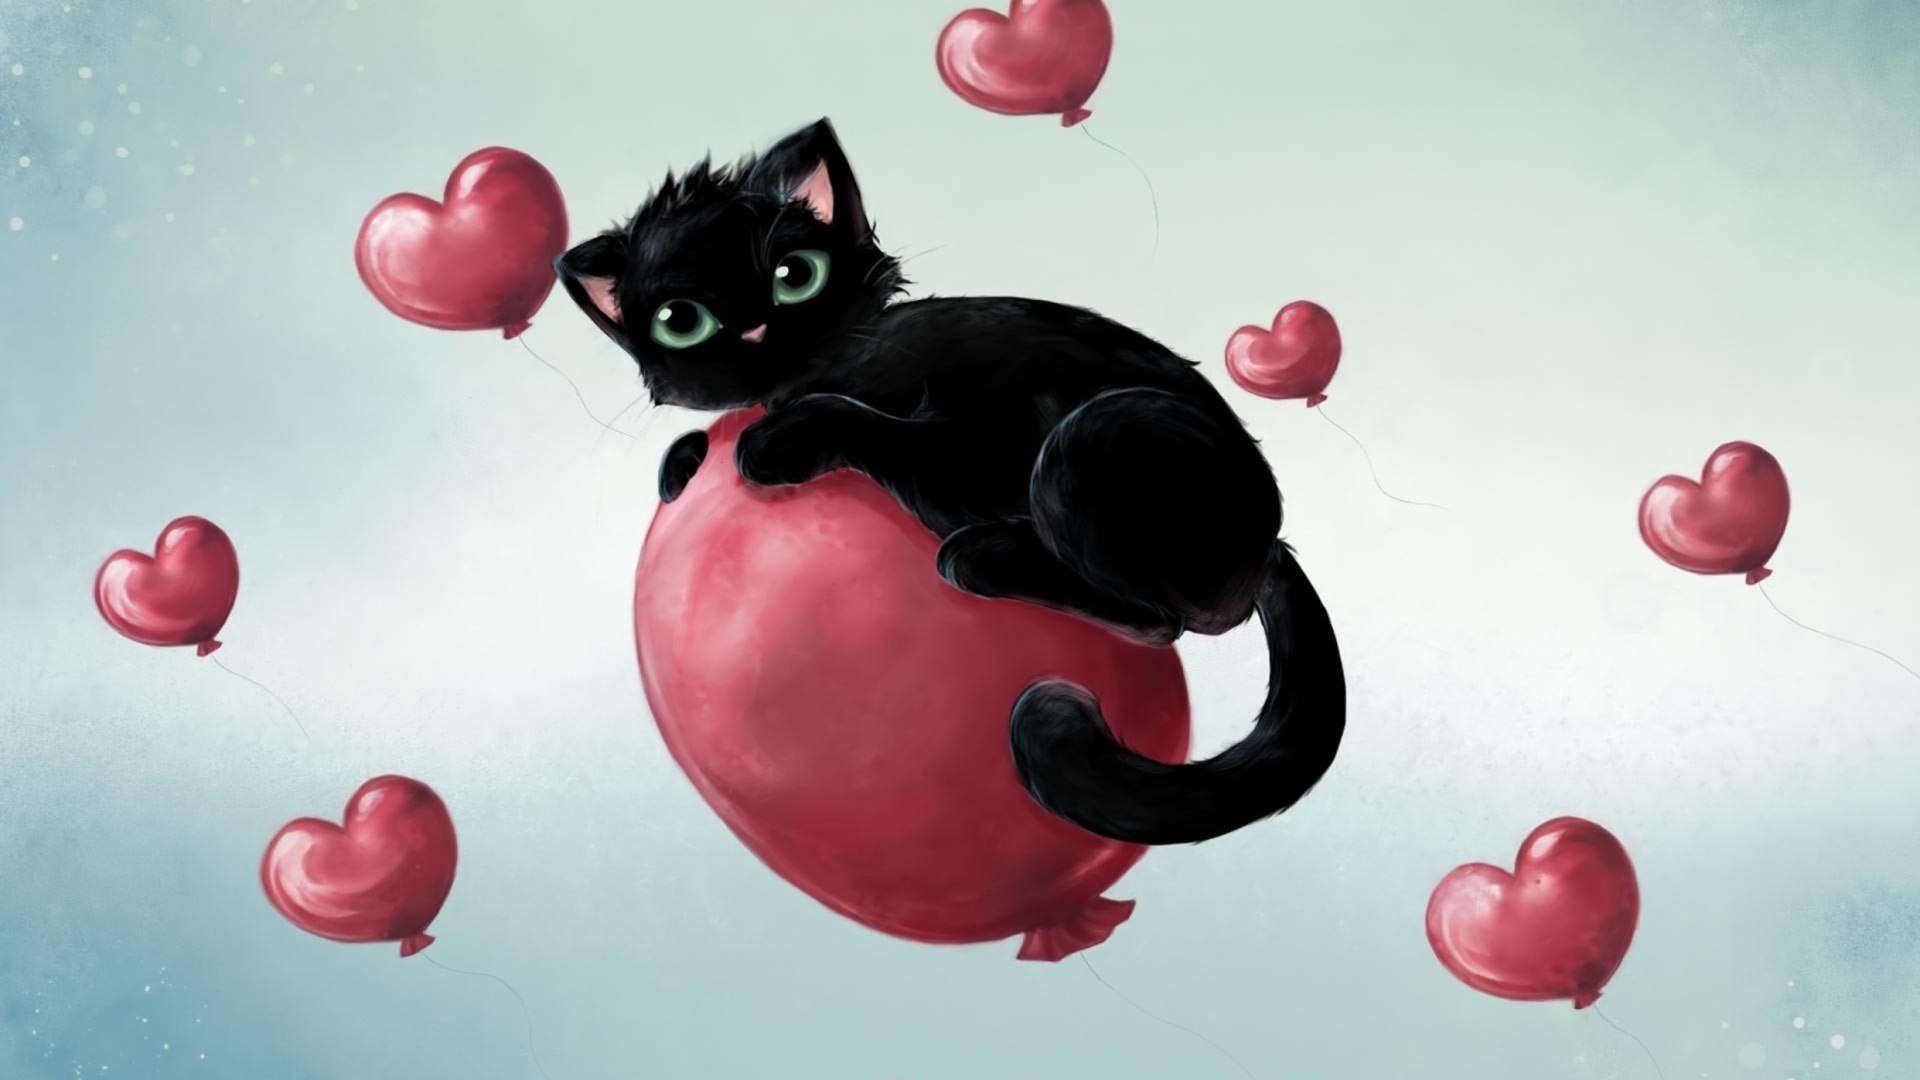 Das Black Kitty And Red Heart Balloons Wallpaper 1920x1080